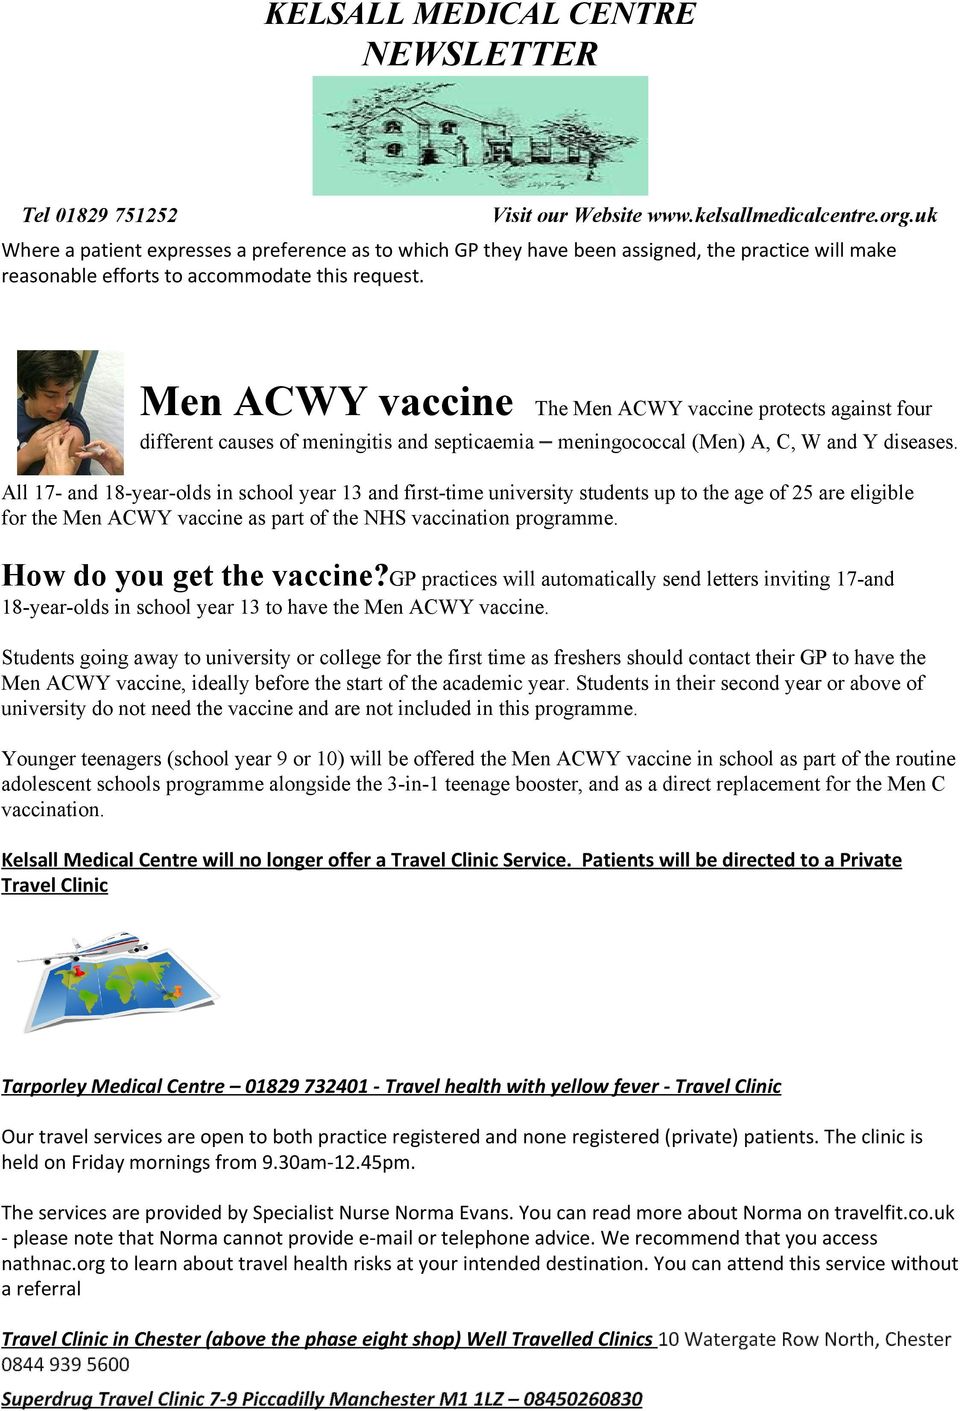 All 17 and 18 year olds in school year 13 and first time university students up to the age of 25 are eligible for the Men ACWY vaccine as part of the NHS vaccination programme.